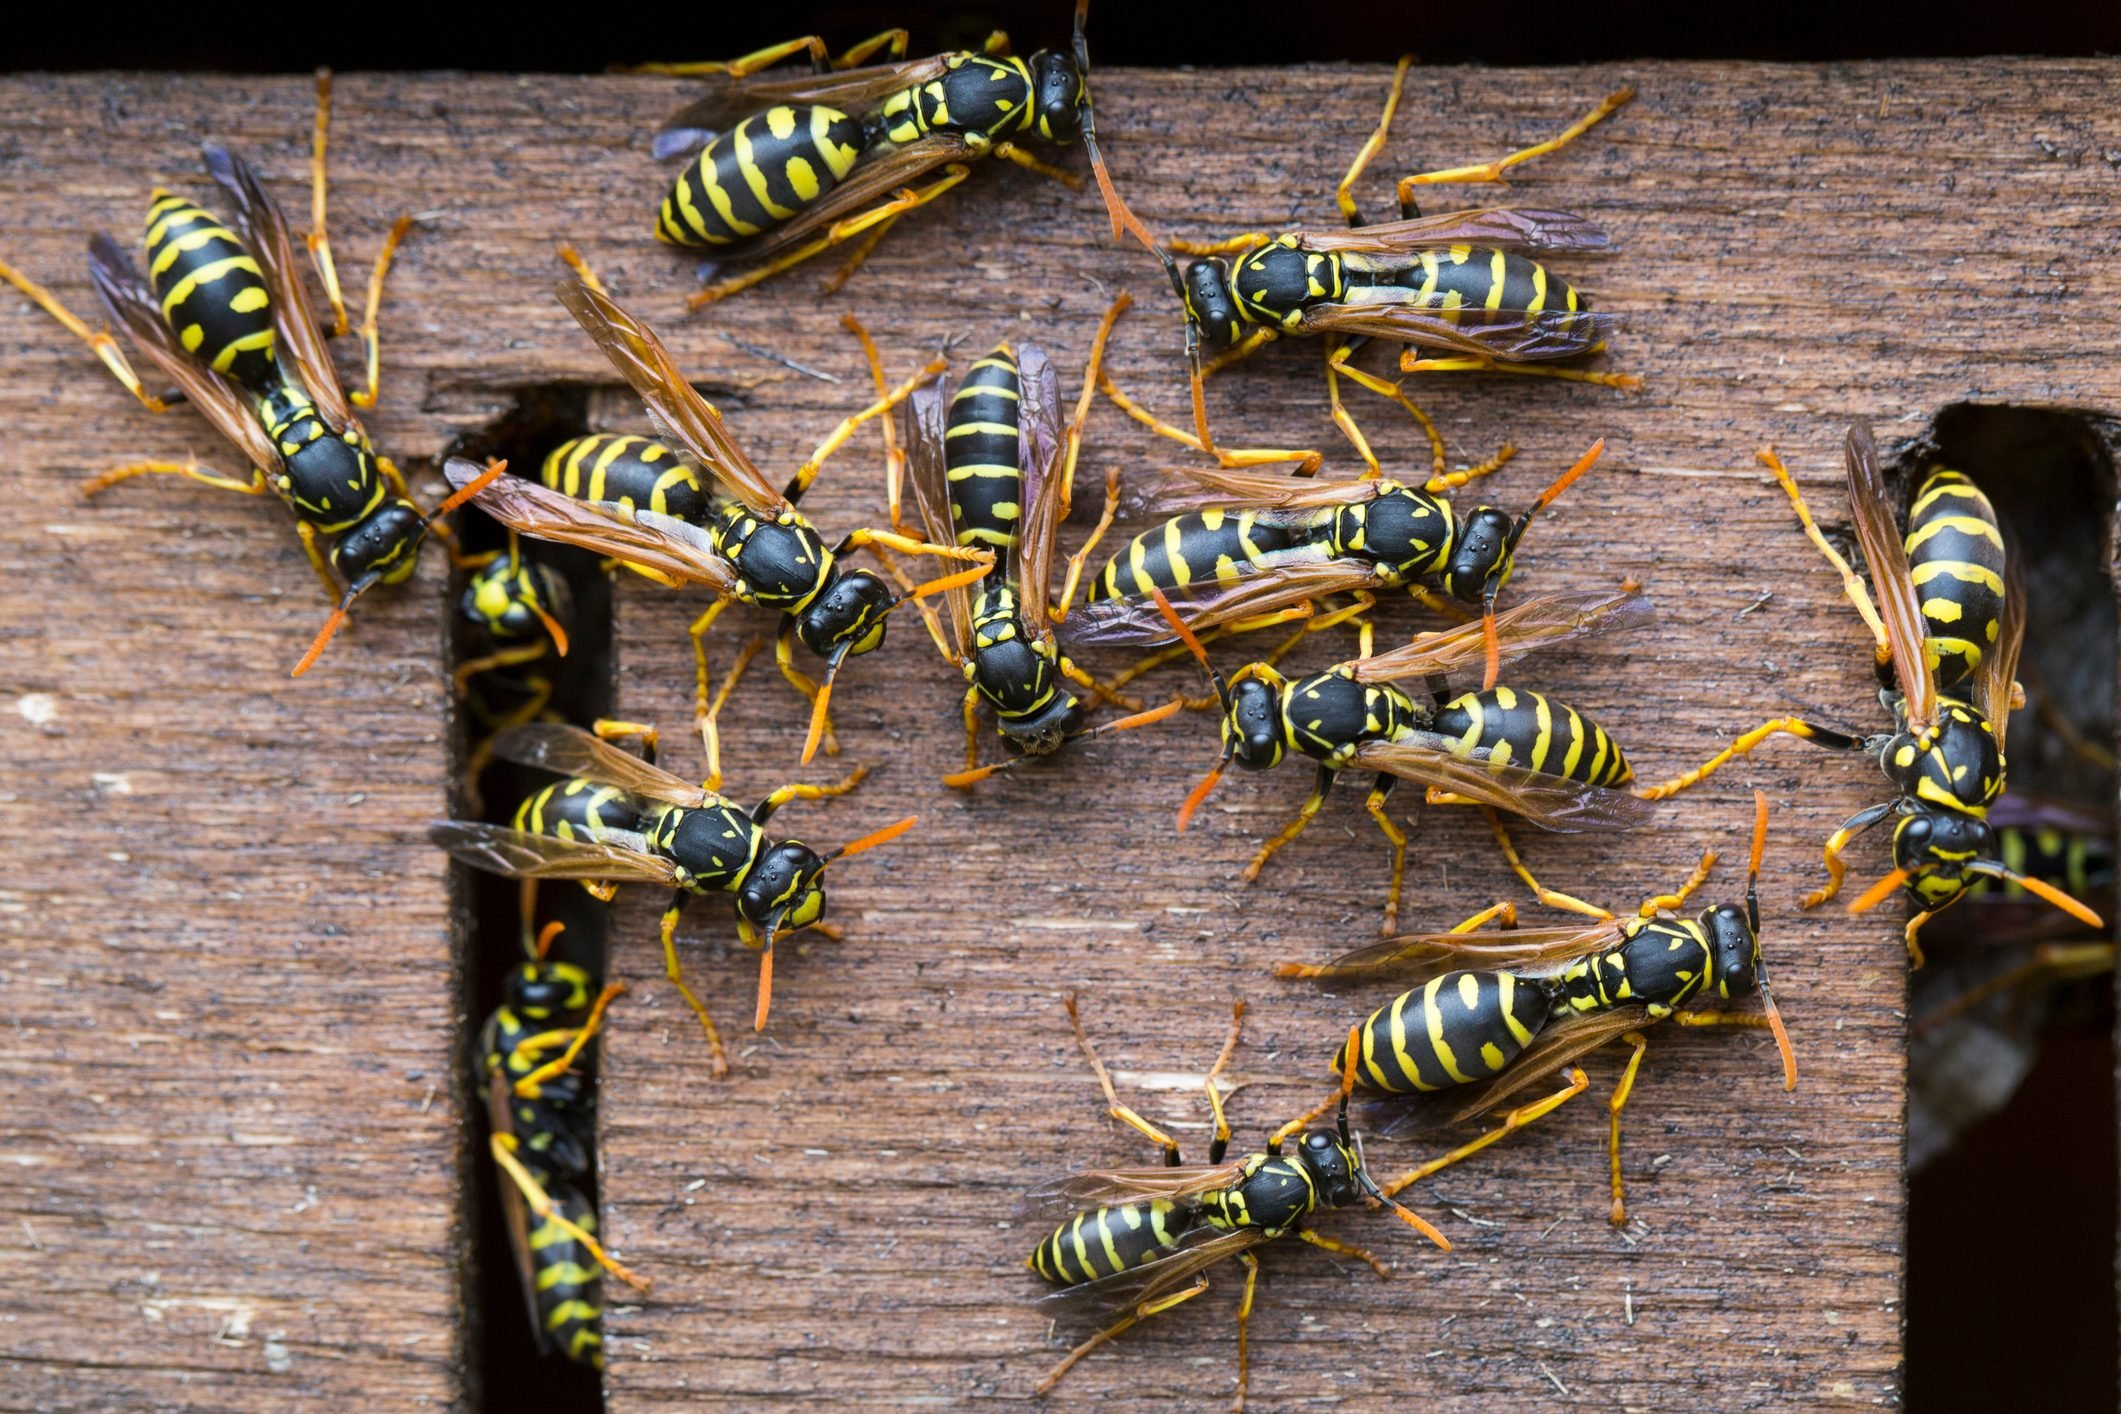 Who Wants a Wasp Waist? - Bug Squad - ANR Blogs